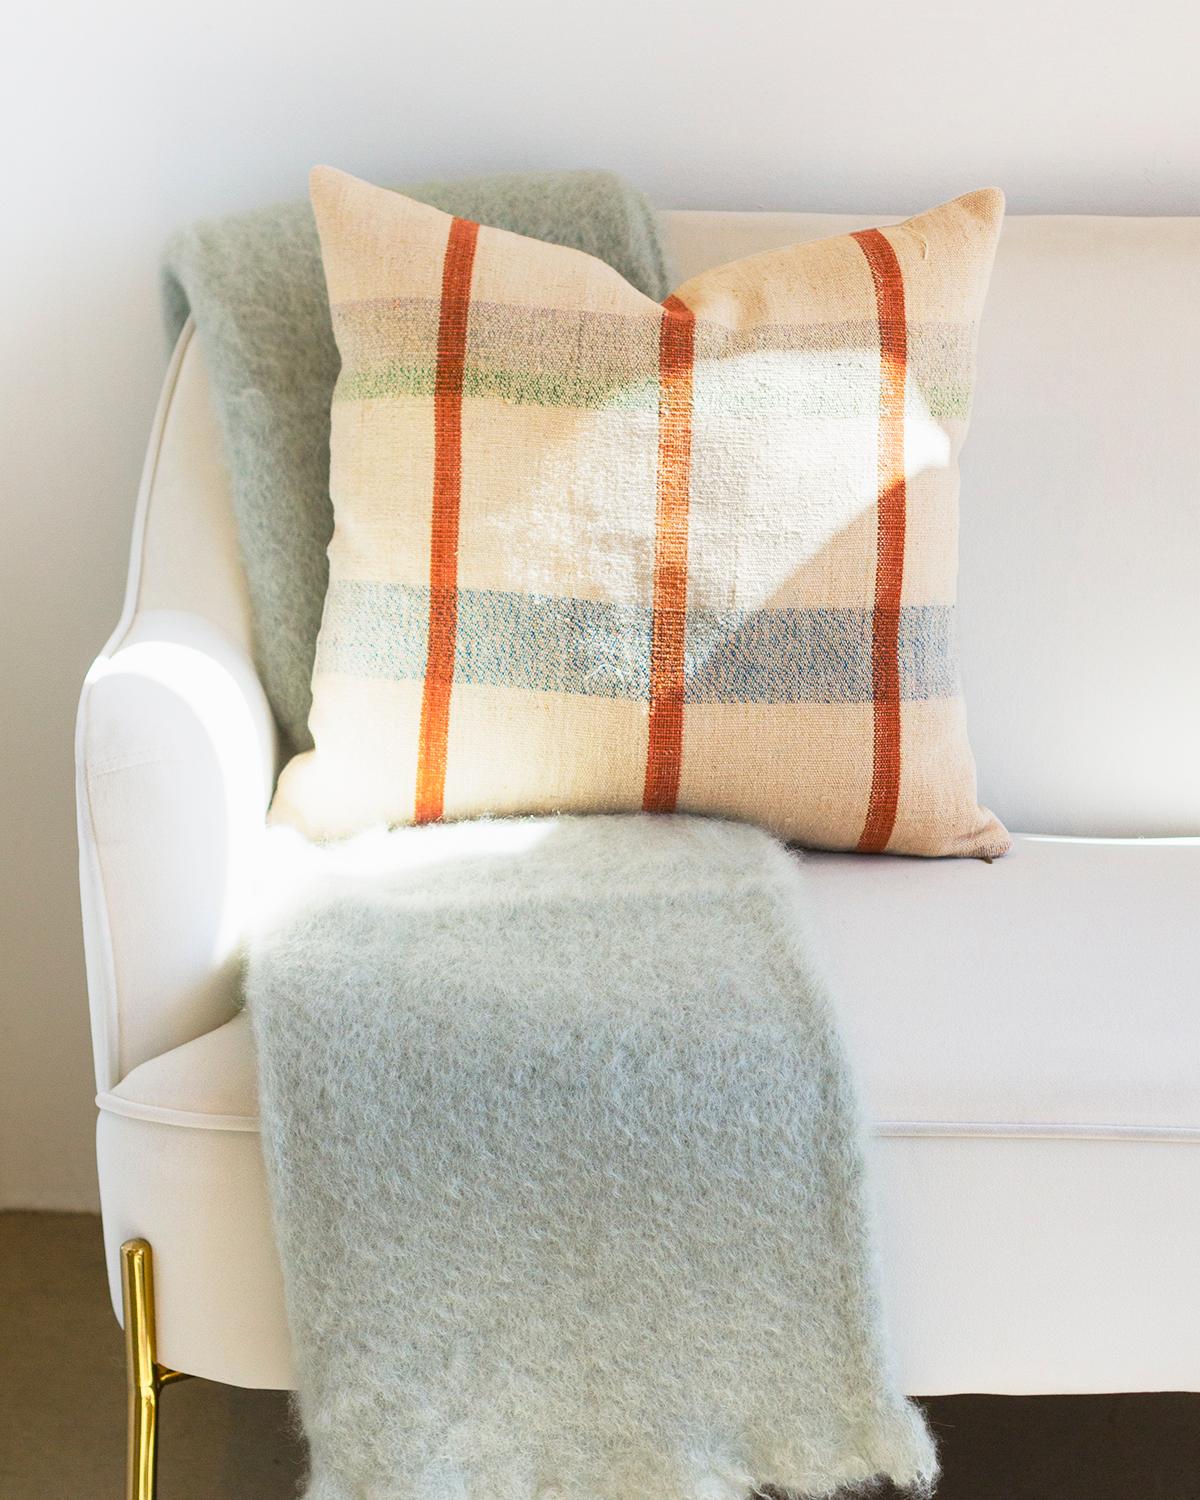 This Seafoam Mohair Blanket Throw provides a soft, cozy feel to warm up your winter. The light gray with a hint of greenish blue offers a unique, neutral look to any home, providing a quiet luxury. Each blanket is handmade from natural mohair,